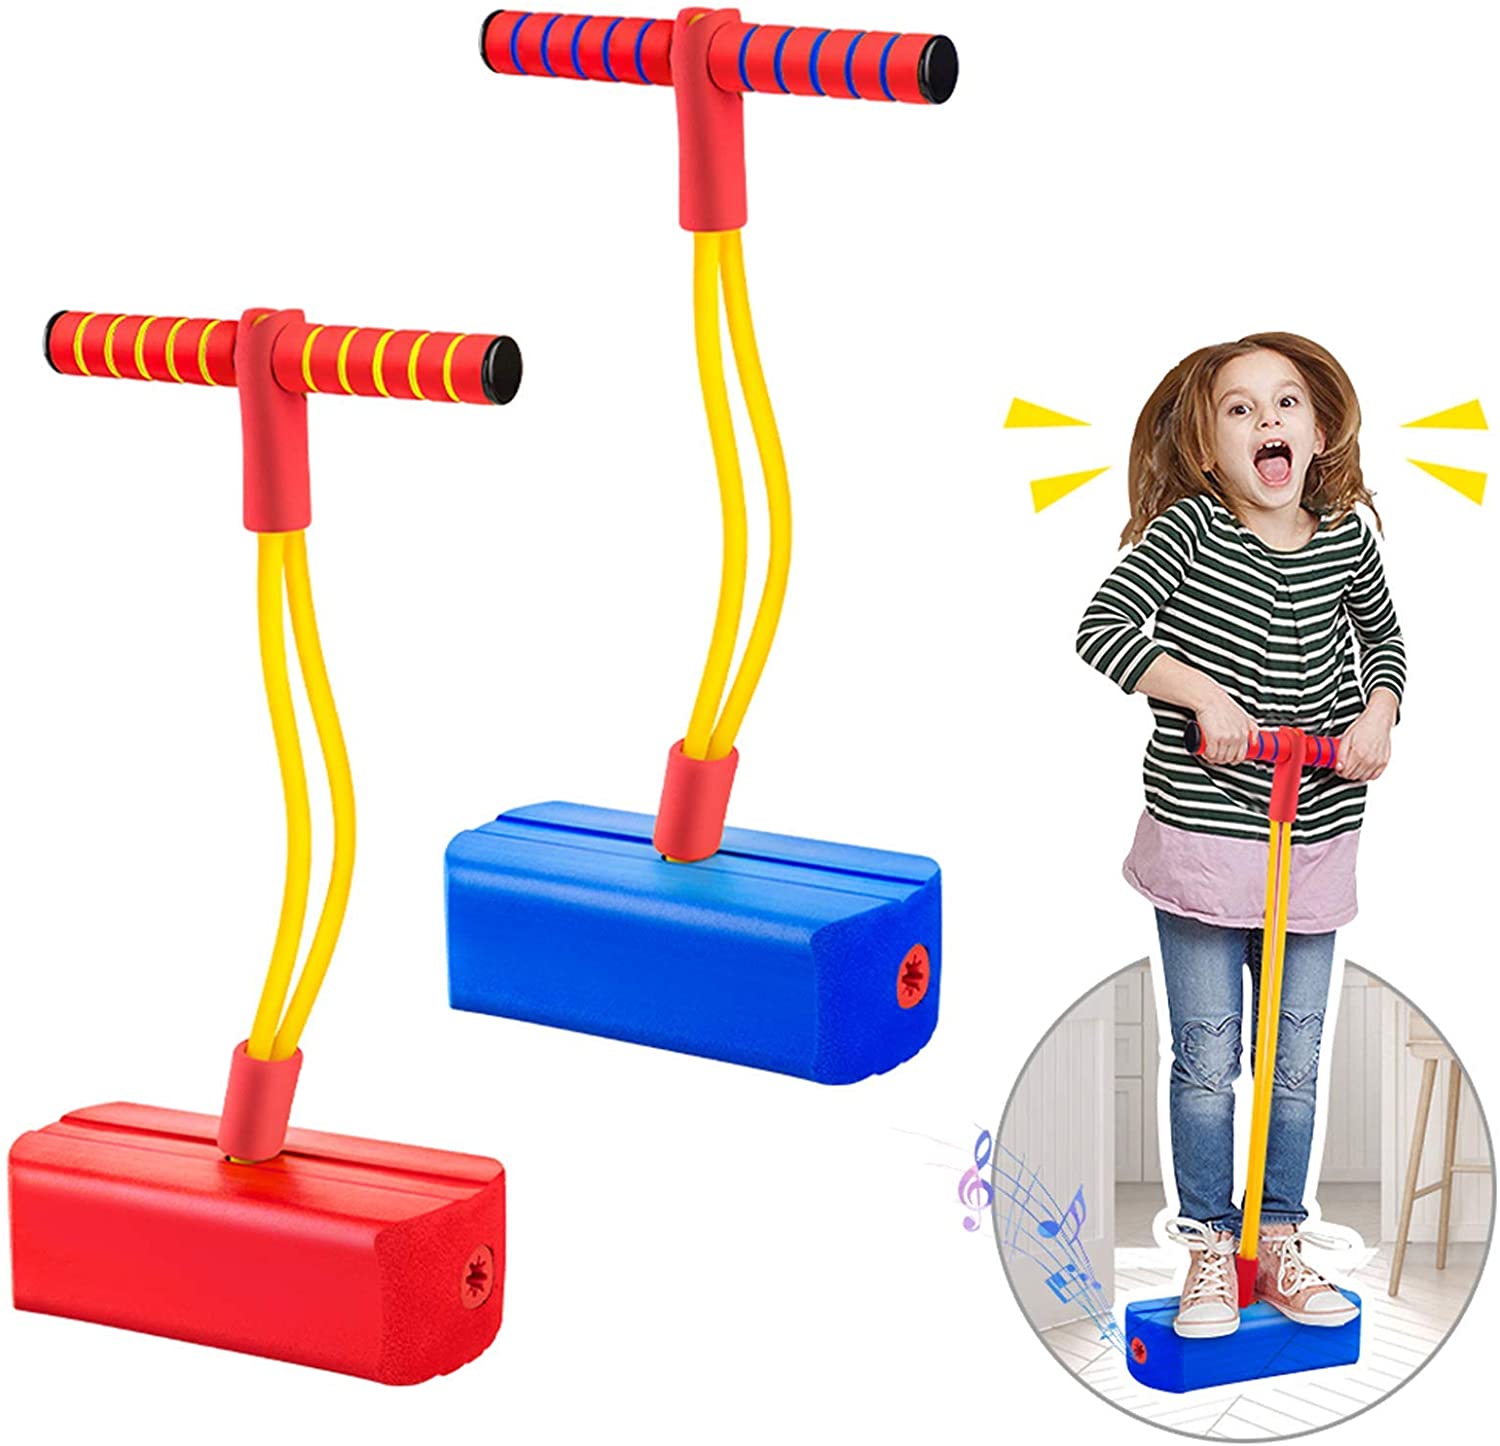 Foam Pogo Stick Bungee Jumper for Kids Outdoor Toys, Foam Bouncing Toy for Kids Age 3 and up, Squeaky Sounds Pogo Sticks Supports up to 250lbs (Blue&Red)